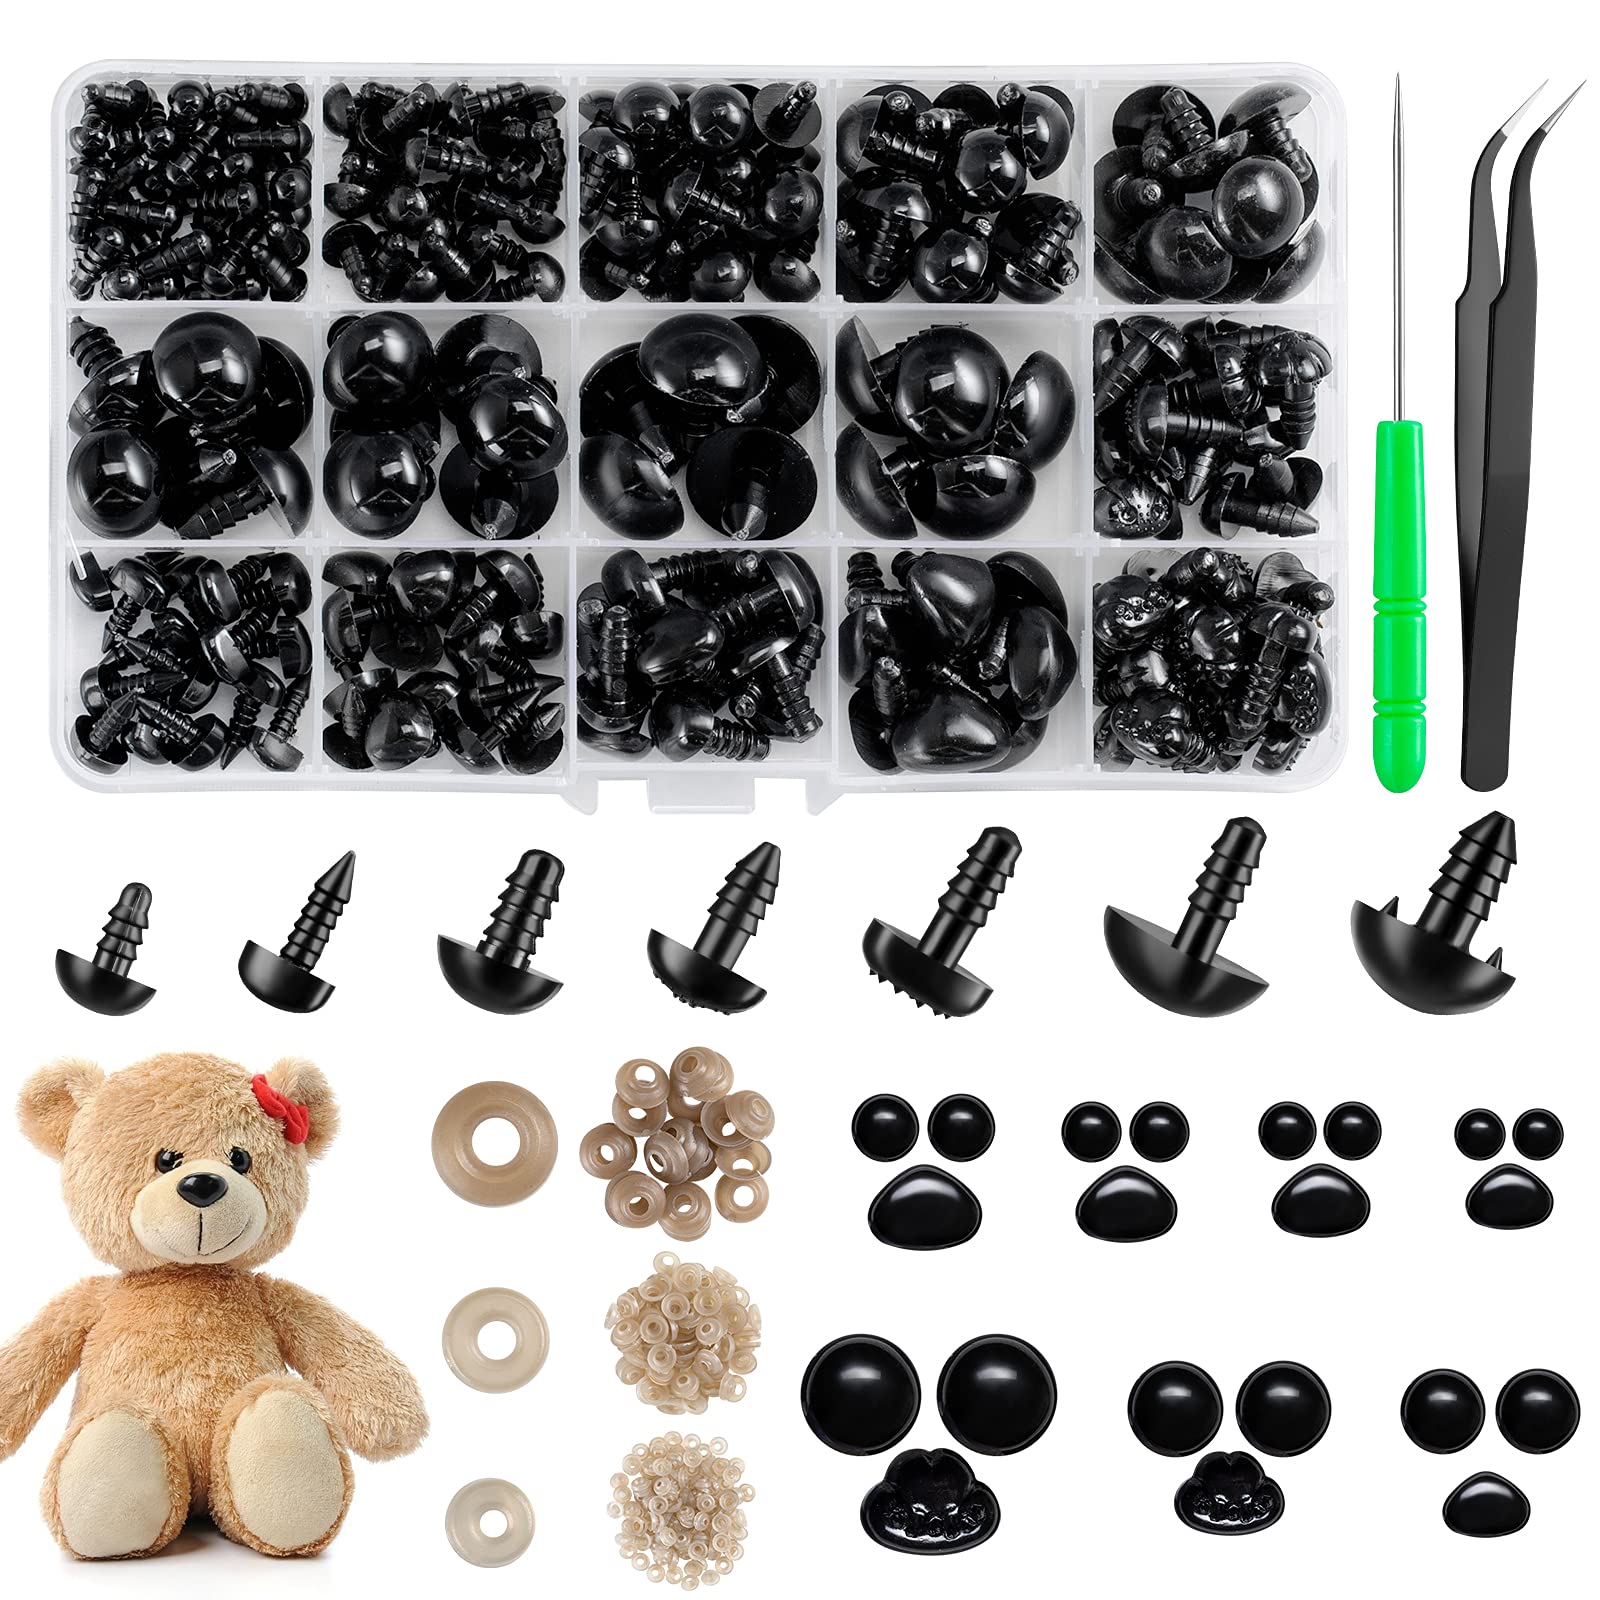 Safety Eyes and Noses Plastic Craft Eyes and Teddy Bear Nose for